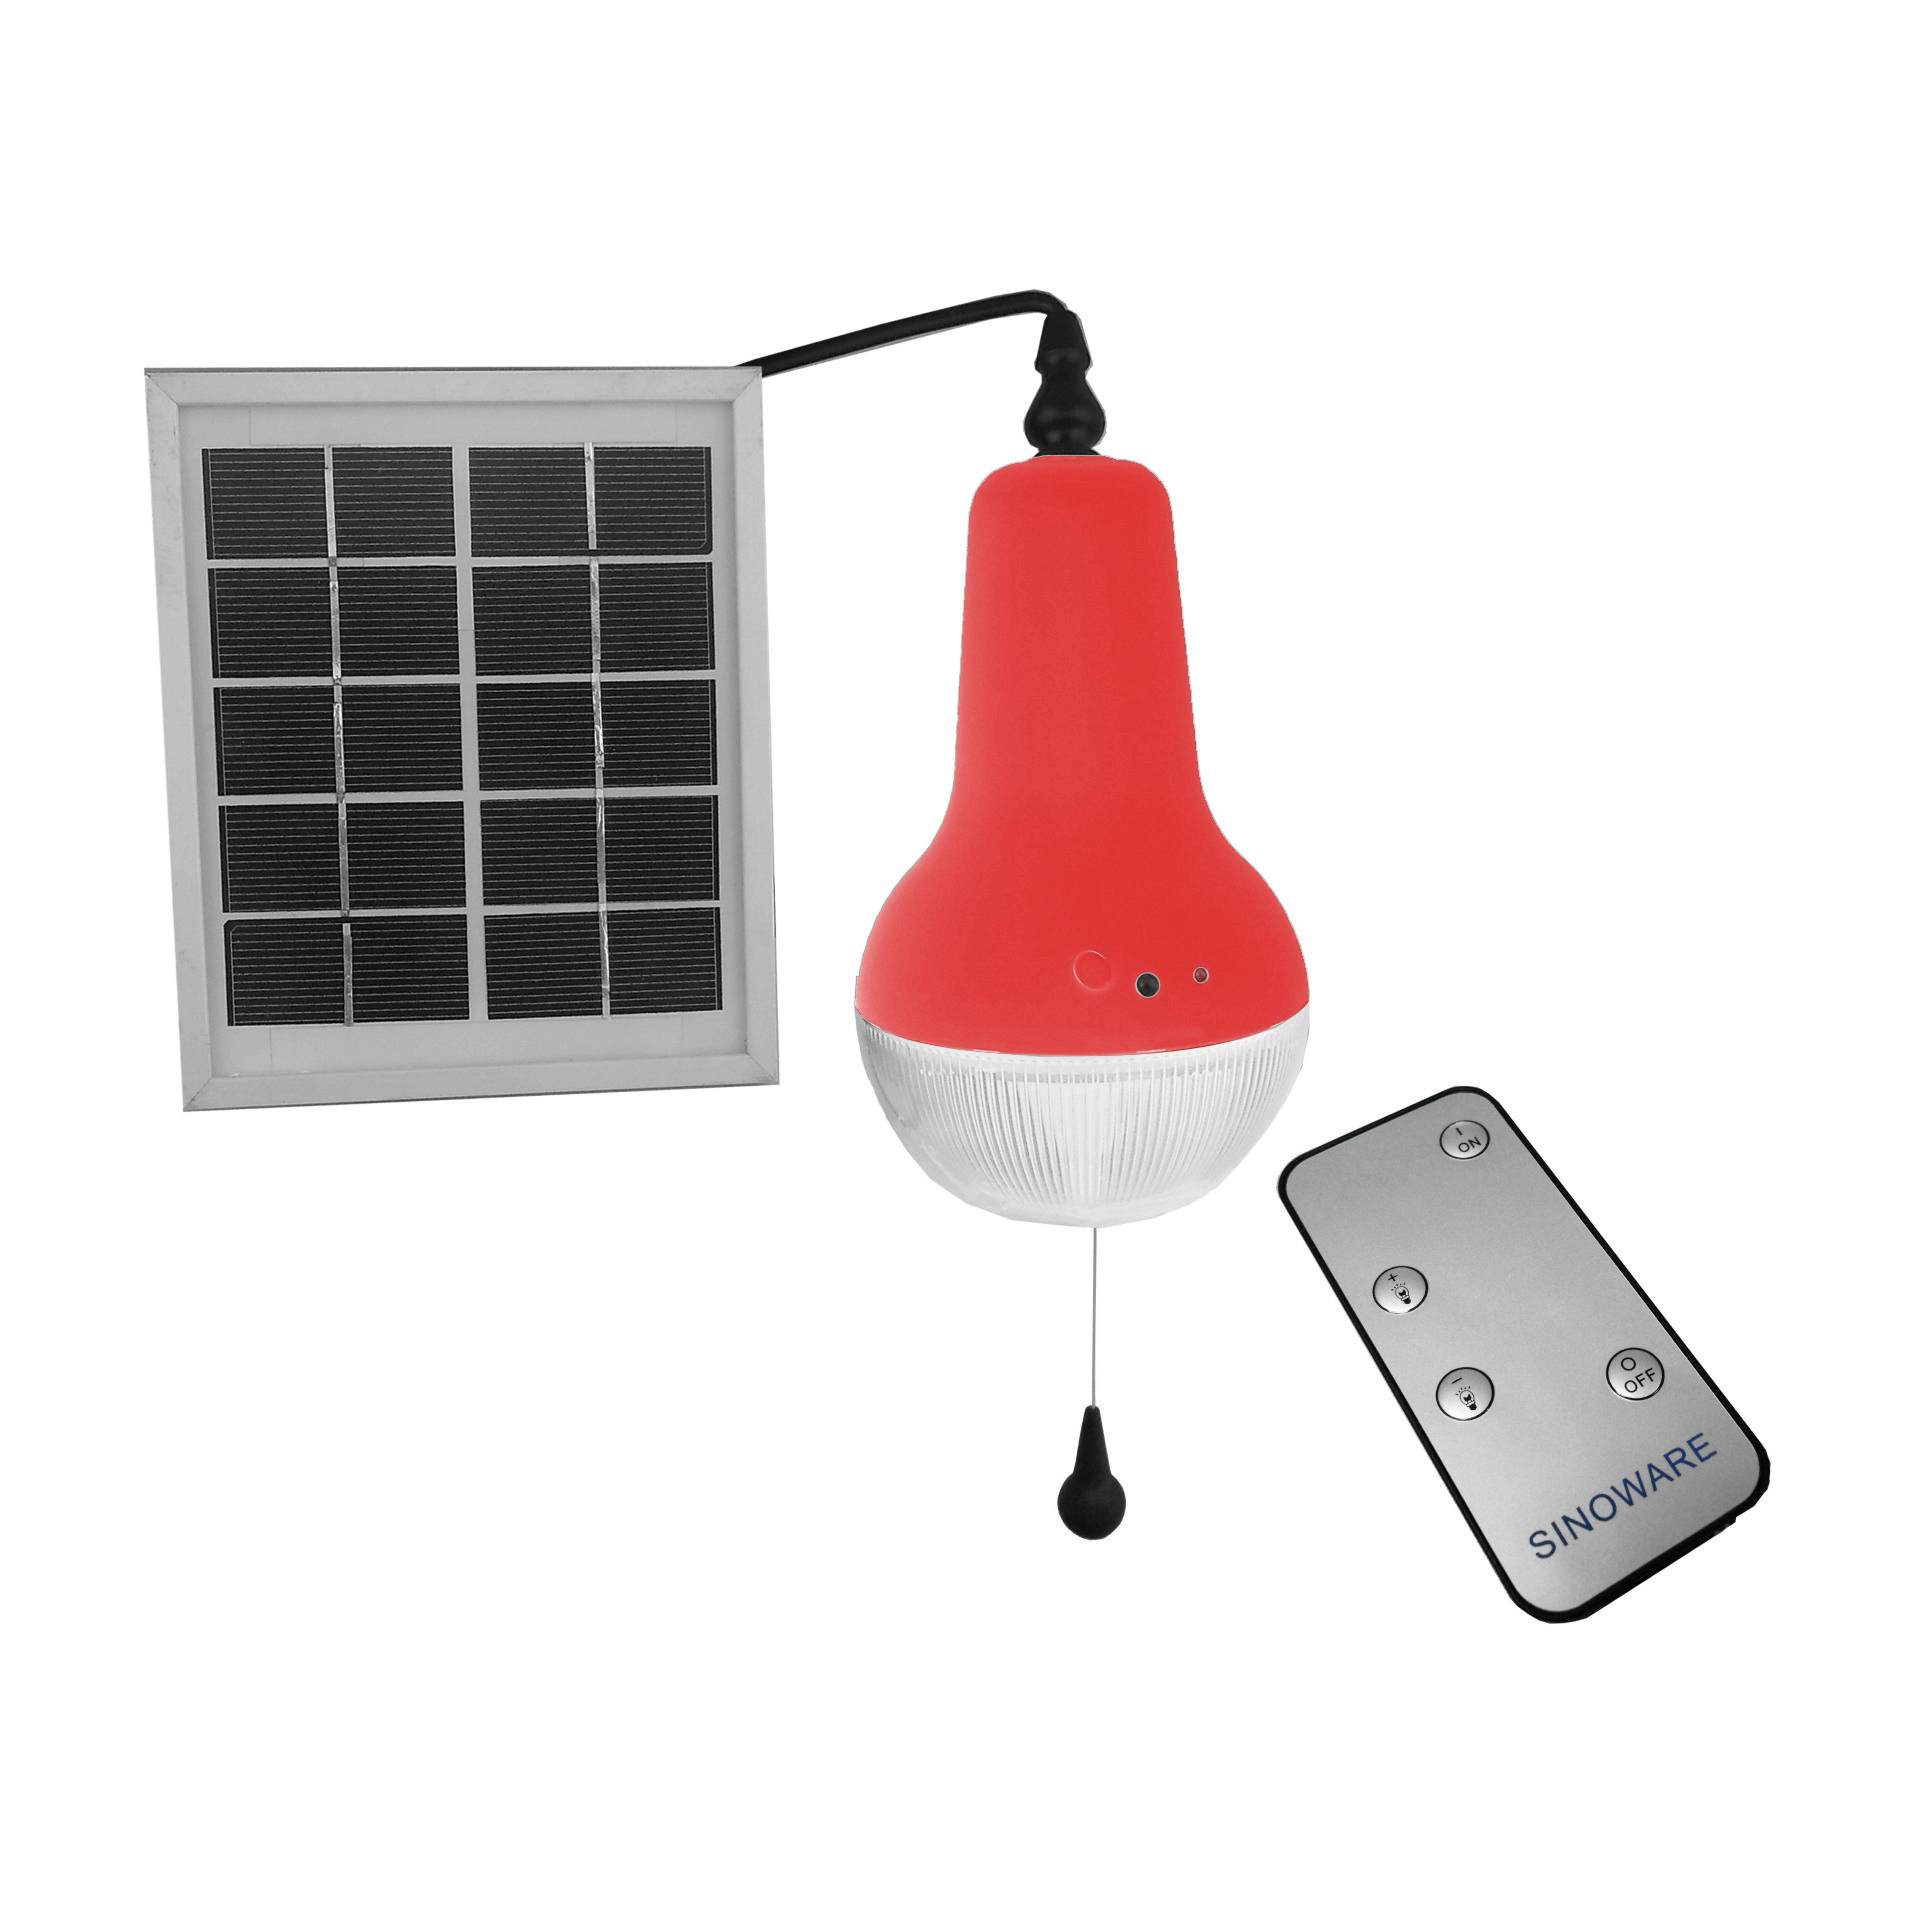 China Manufacturer Colorful Solar Lamp With 180 Degree Remote Control Rechargeable Solar Light Indoor Red